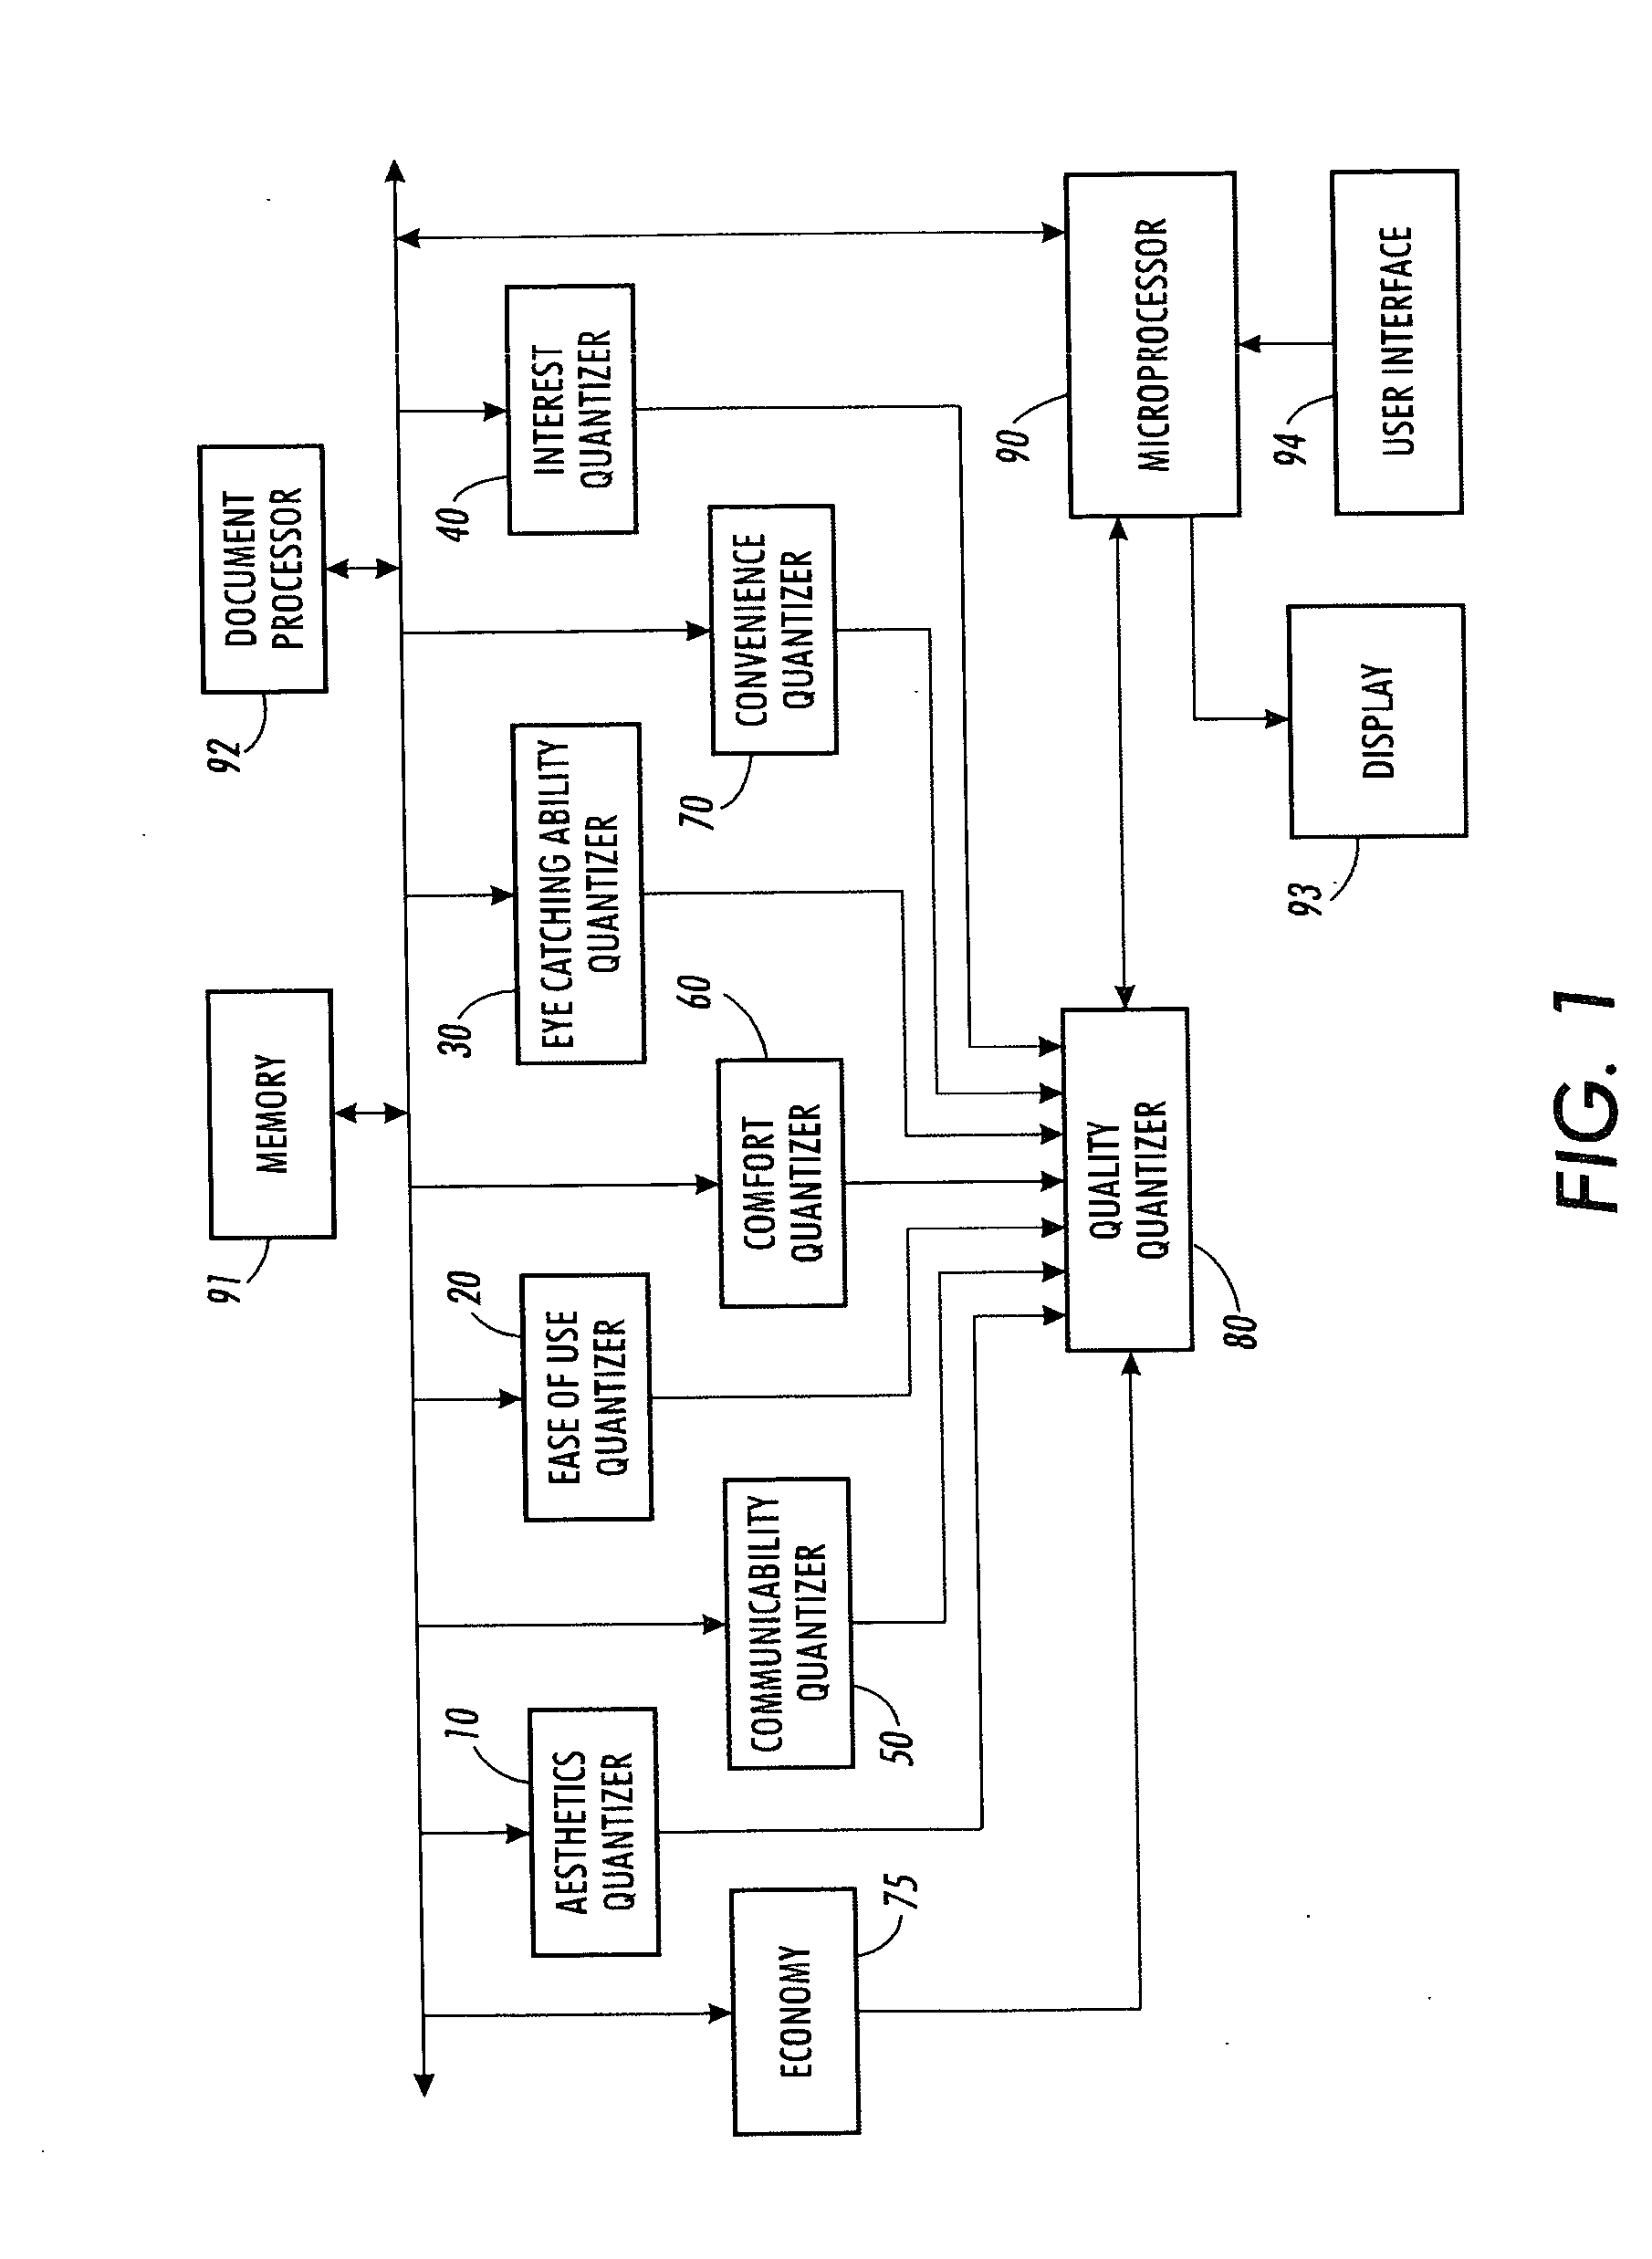 Method for determining overall effectiveness of a document